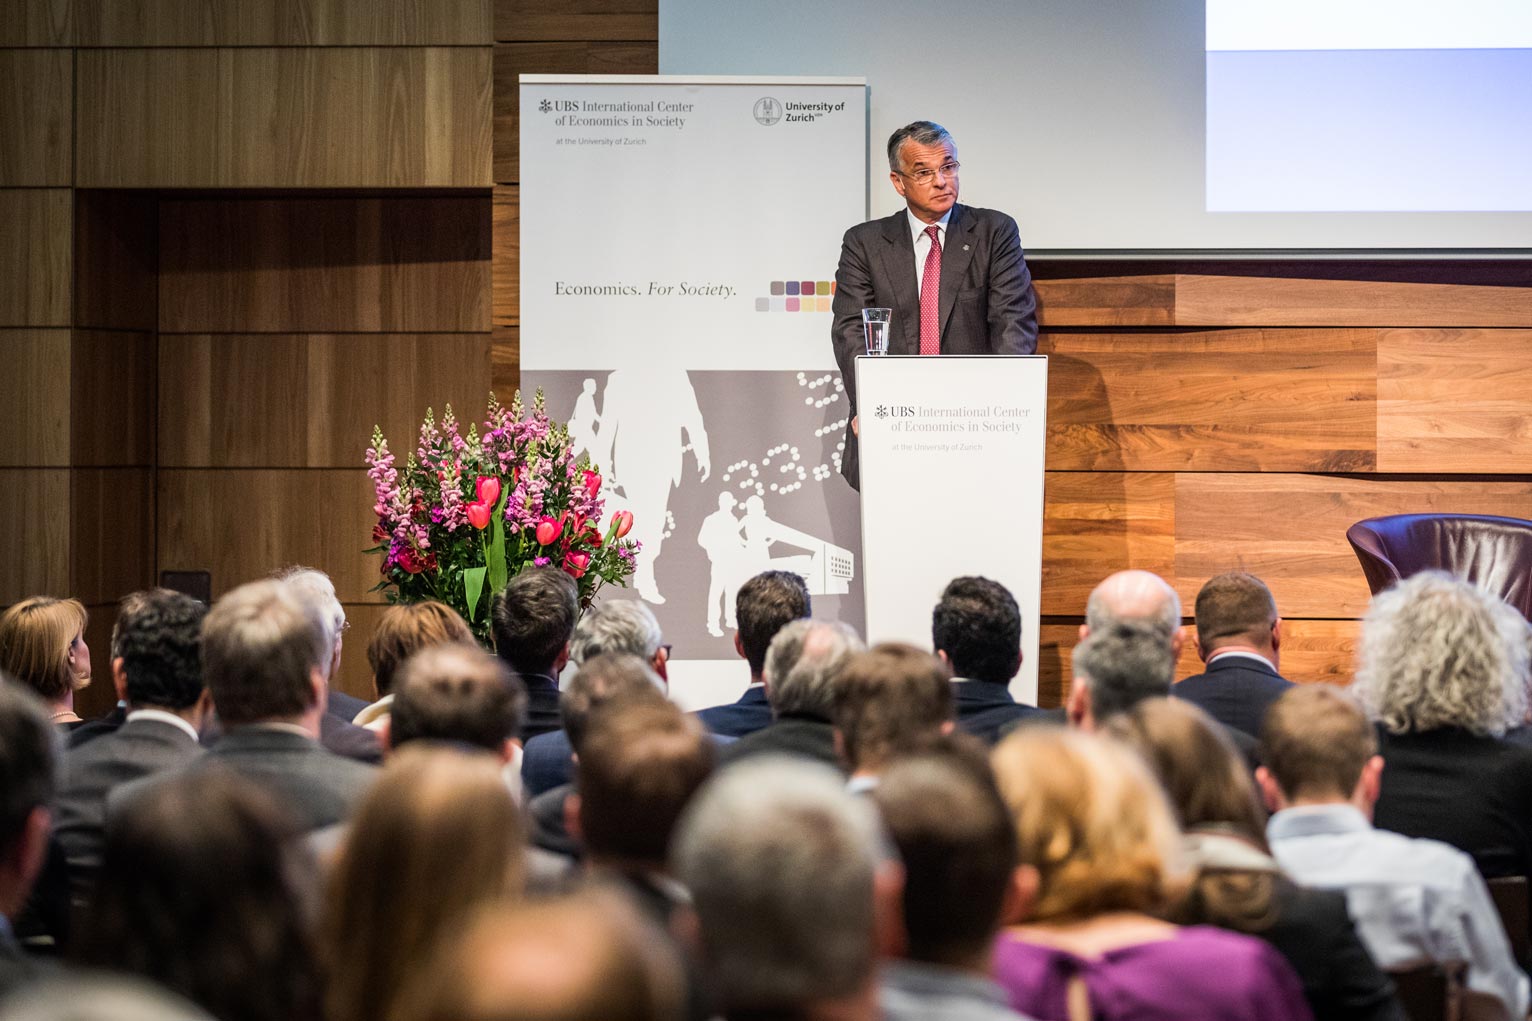 UBS Group CEO Sergio Ermotti delivering a keynote at the UBS Center Podium on the future of Swiss Finance.